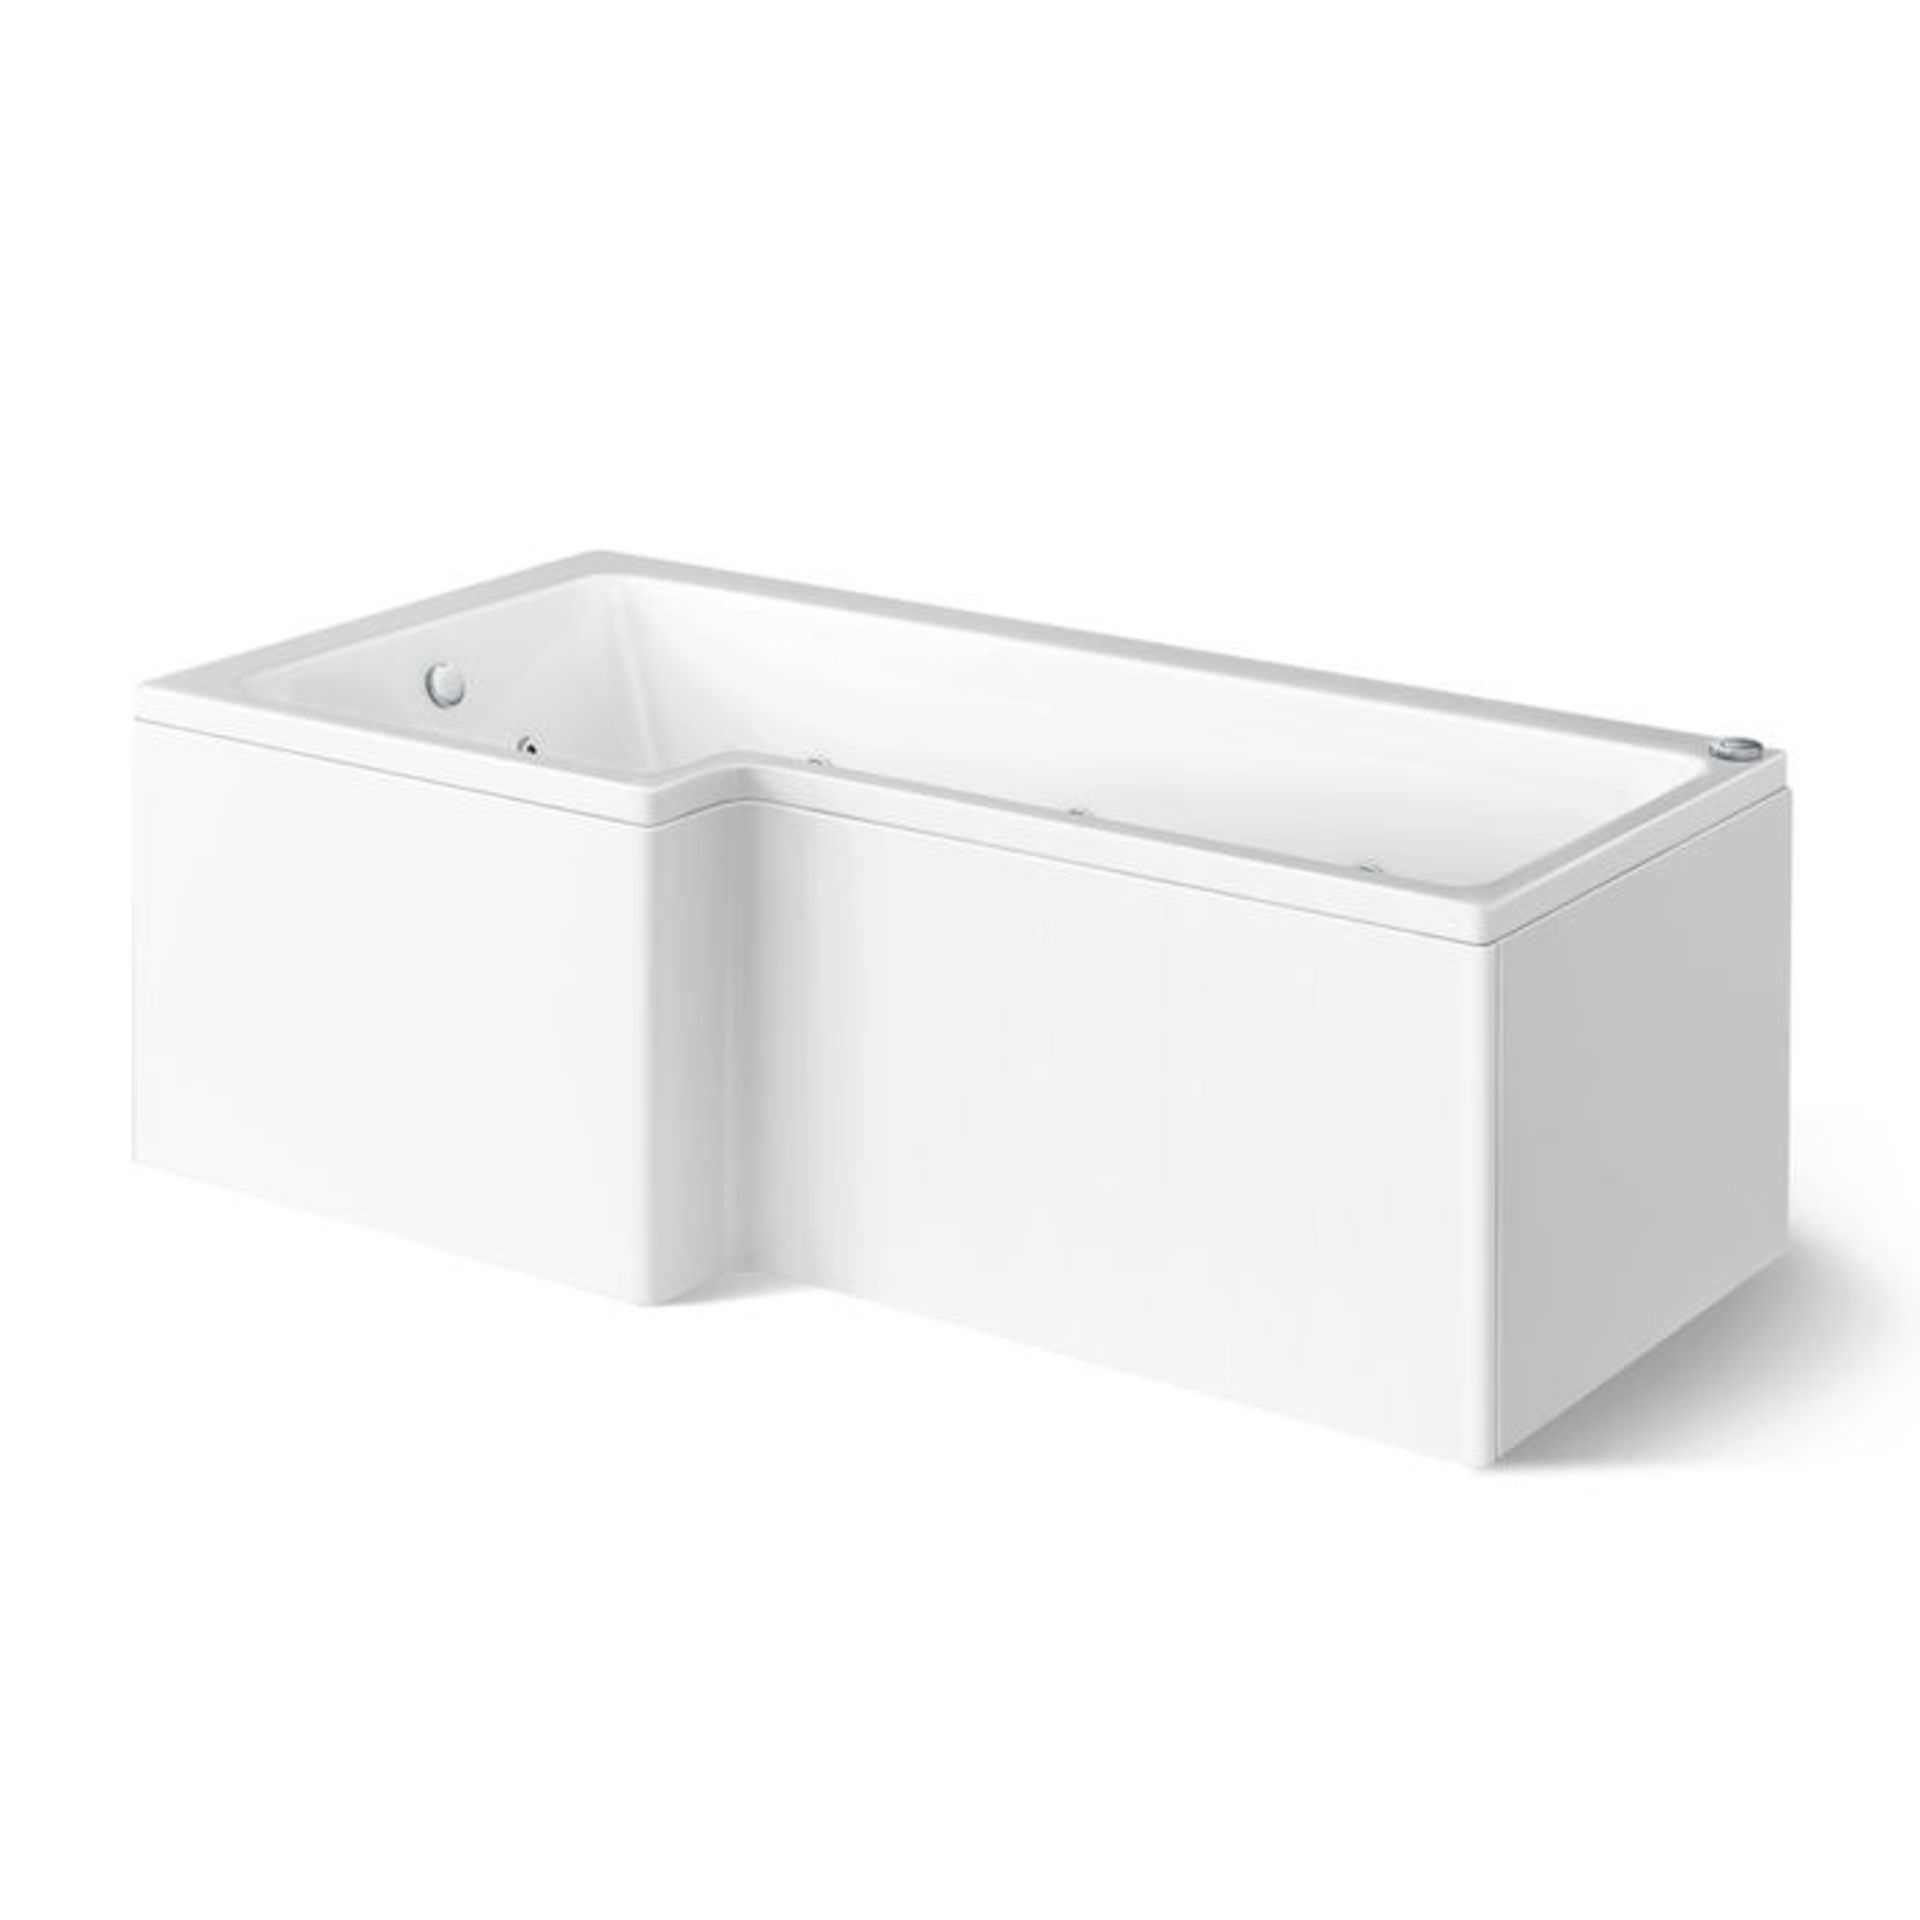 (TA3) 1700x700x510mm Whirlpool Left Hand L Shaped Bath - 14 Jets. Indulge in luxury for a truly - Image 3 of 4